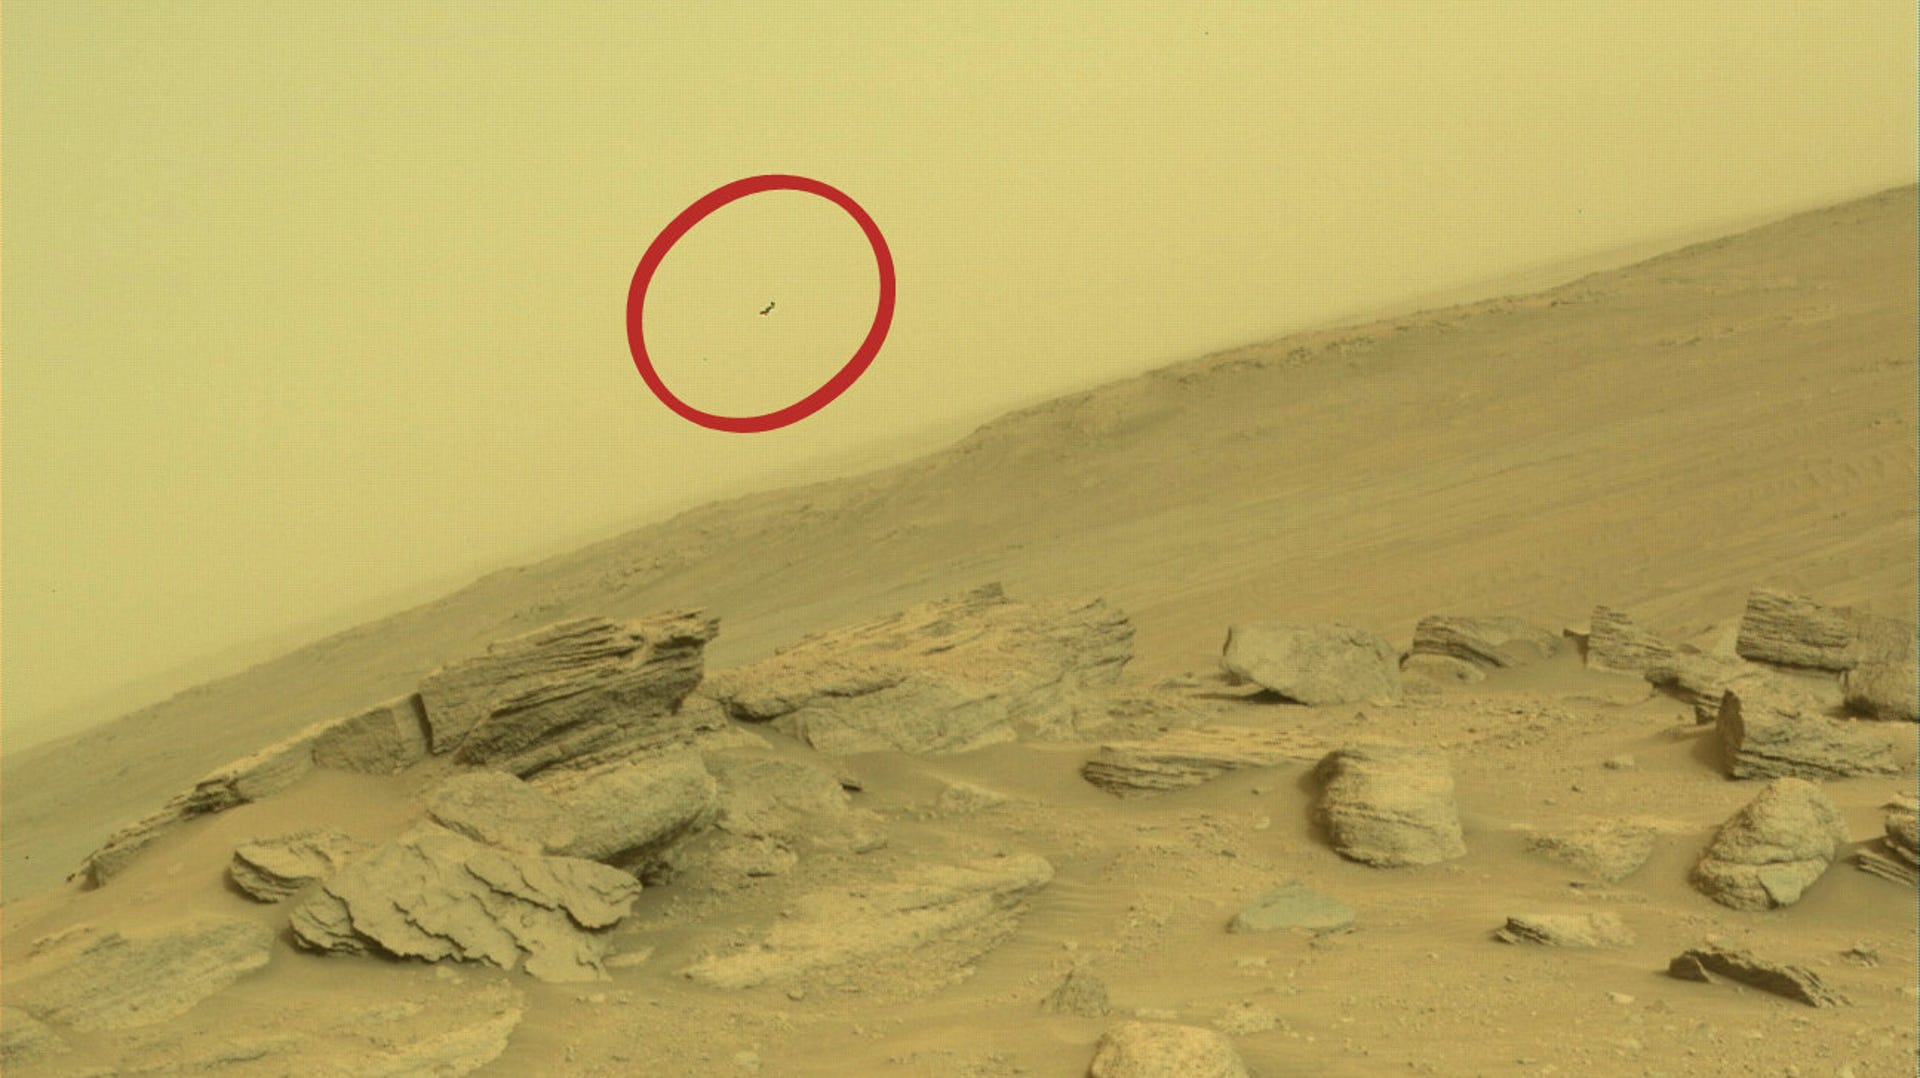 Rocky tilted Mars landscape with boulders shows a streak of something dark and small in the sky.